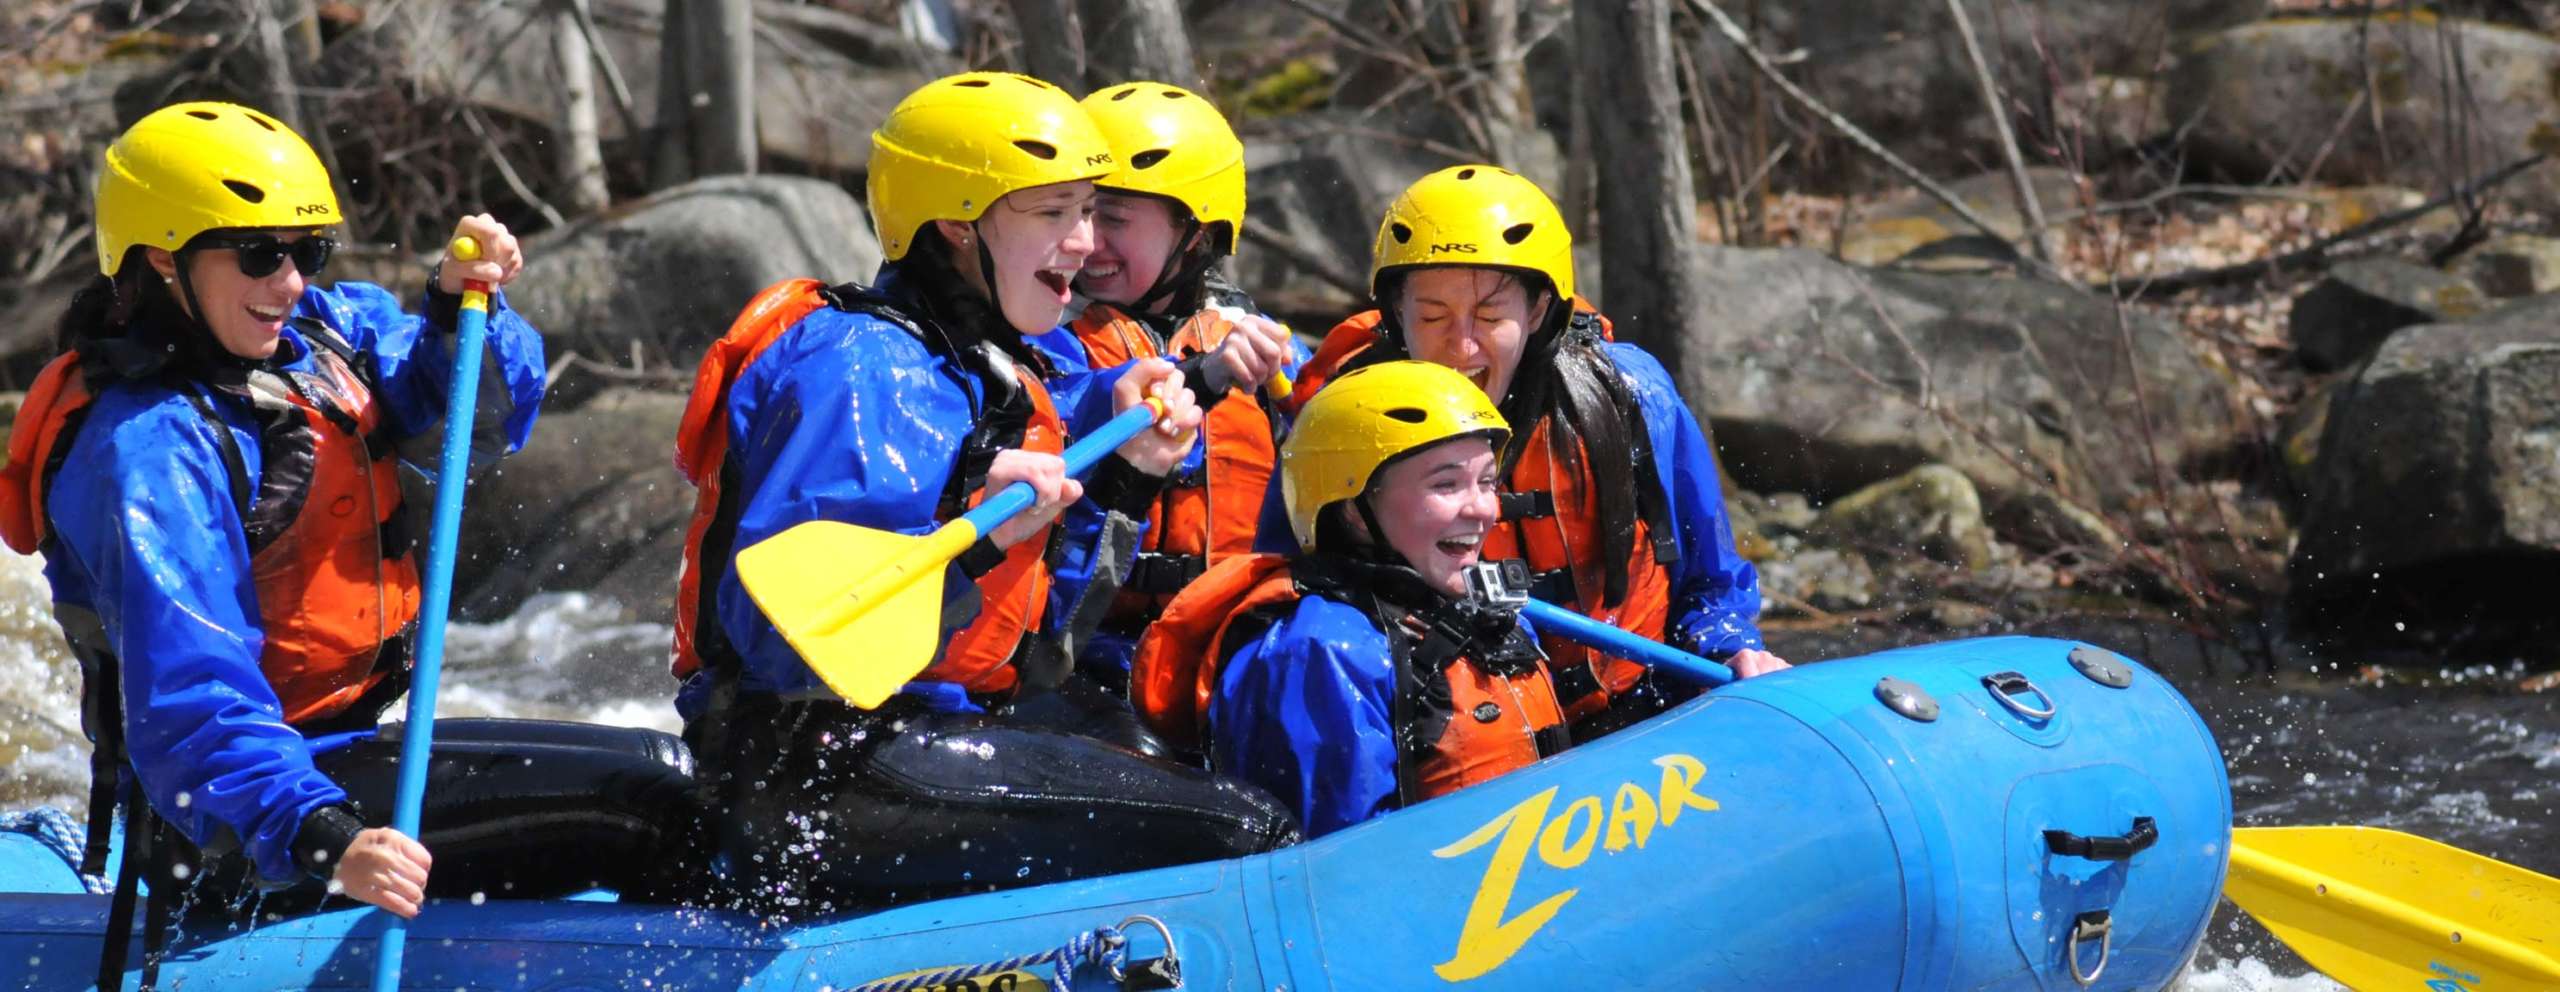 Rafting group having fun and smiling as they navigate rapids